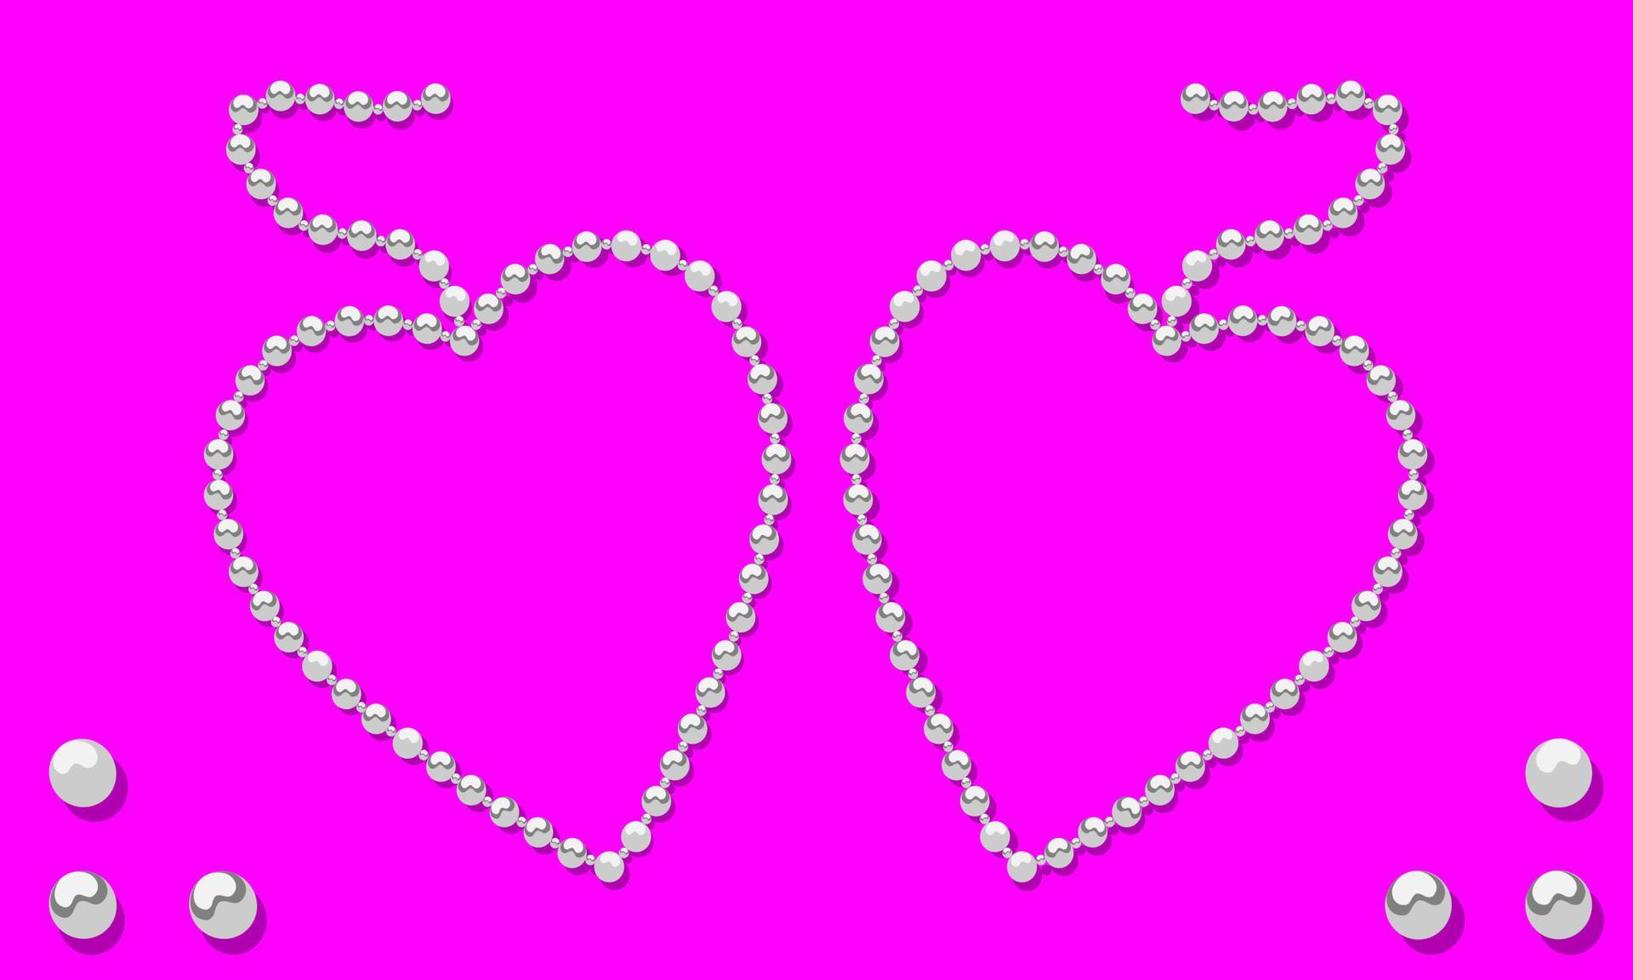 Beautiful pearl necklaces arranged in two heart shapes. Represents love on a purple background. vector